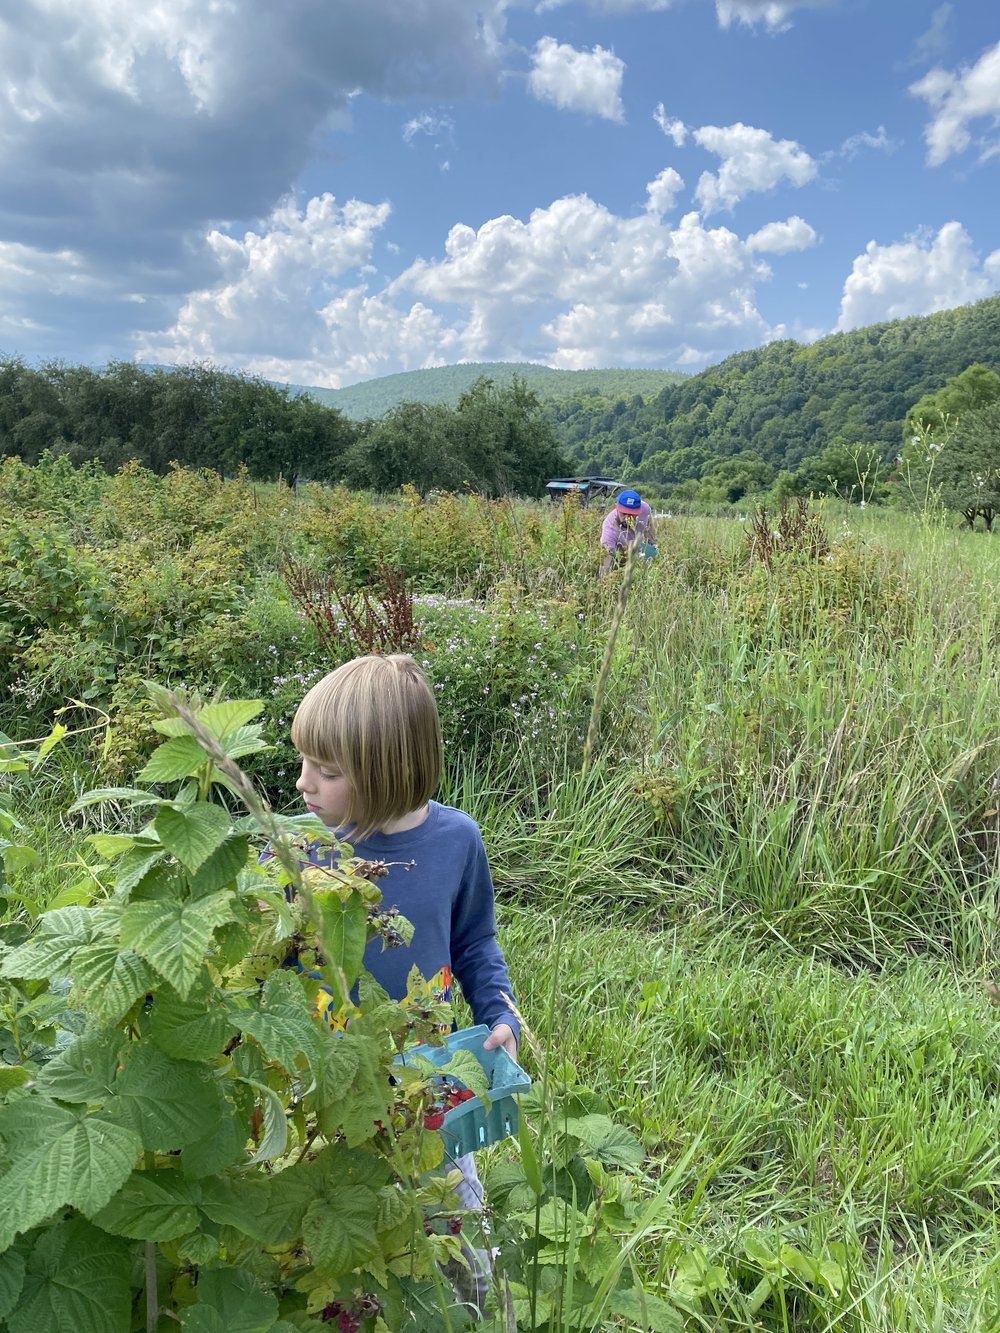 My family picking raspberries at the farm. Photo by me.